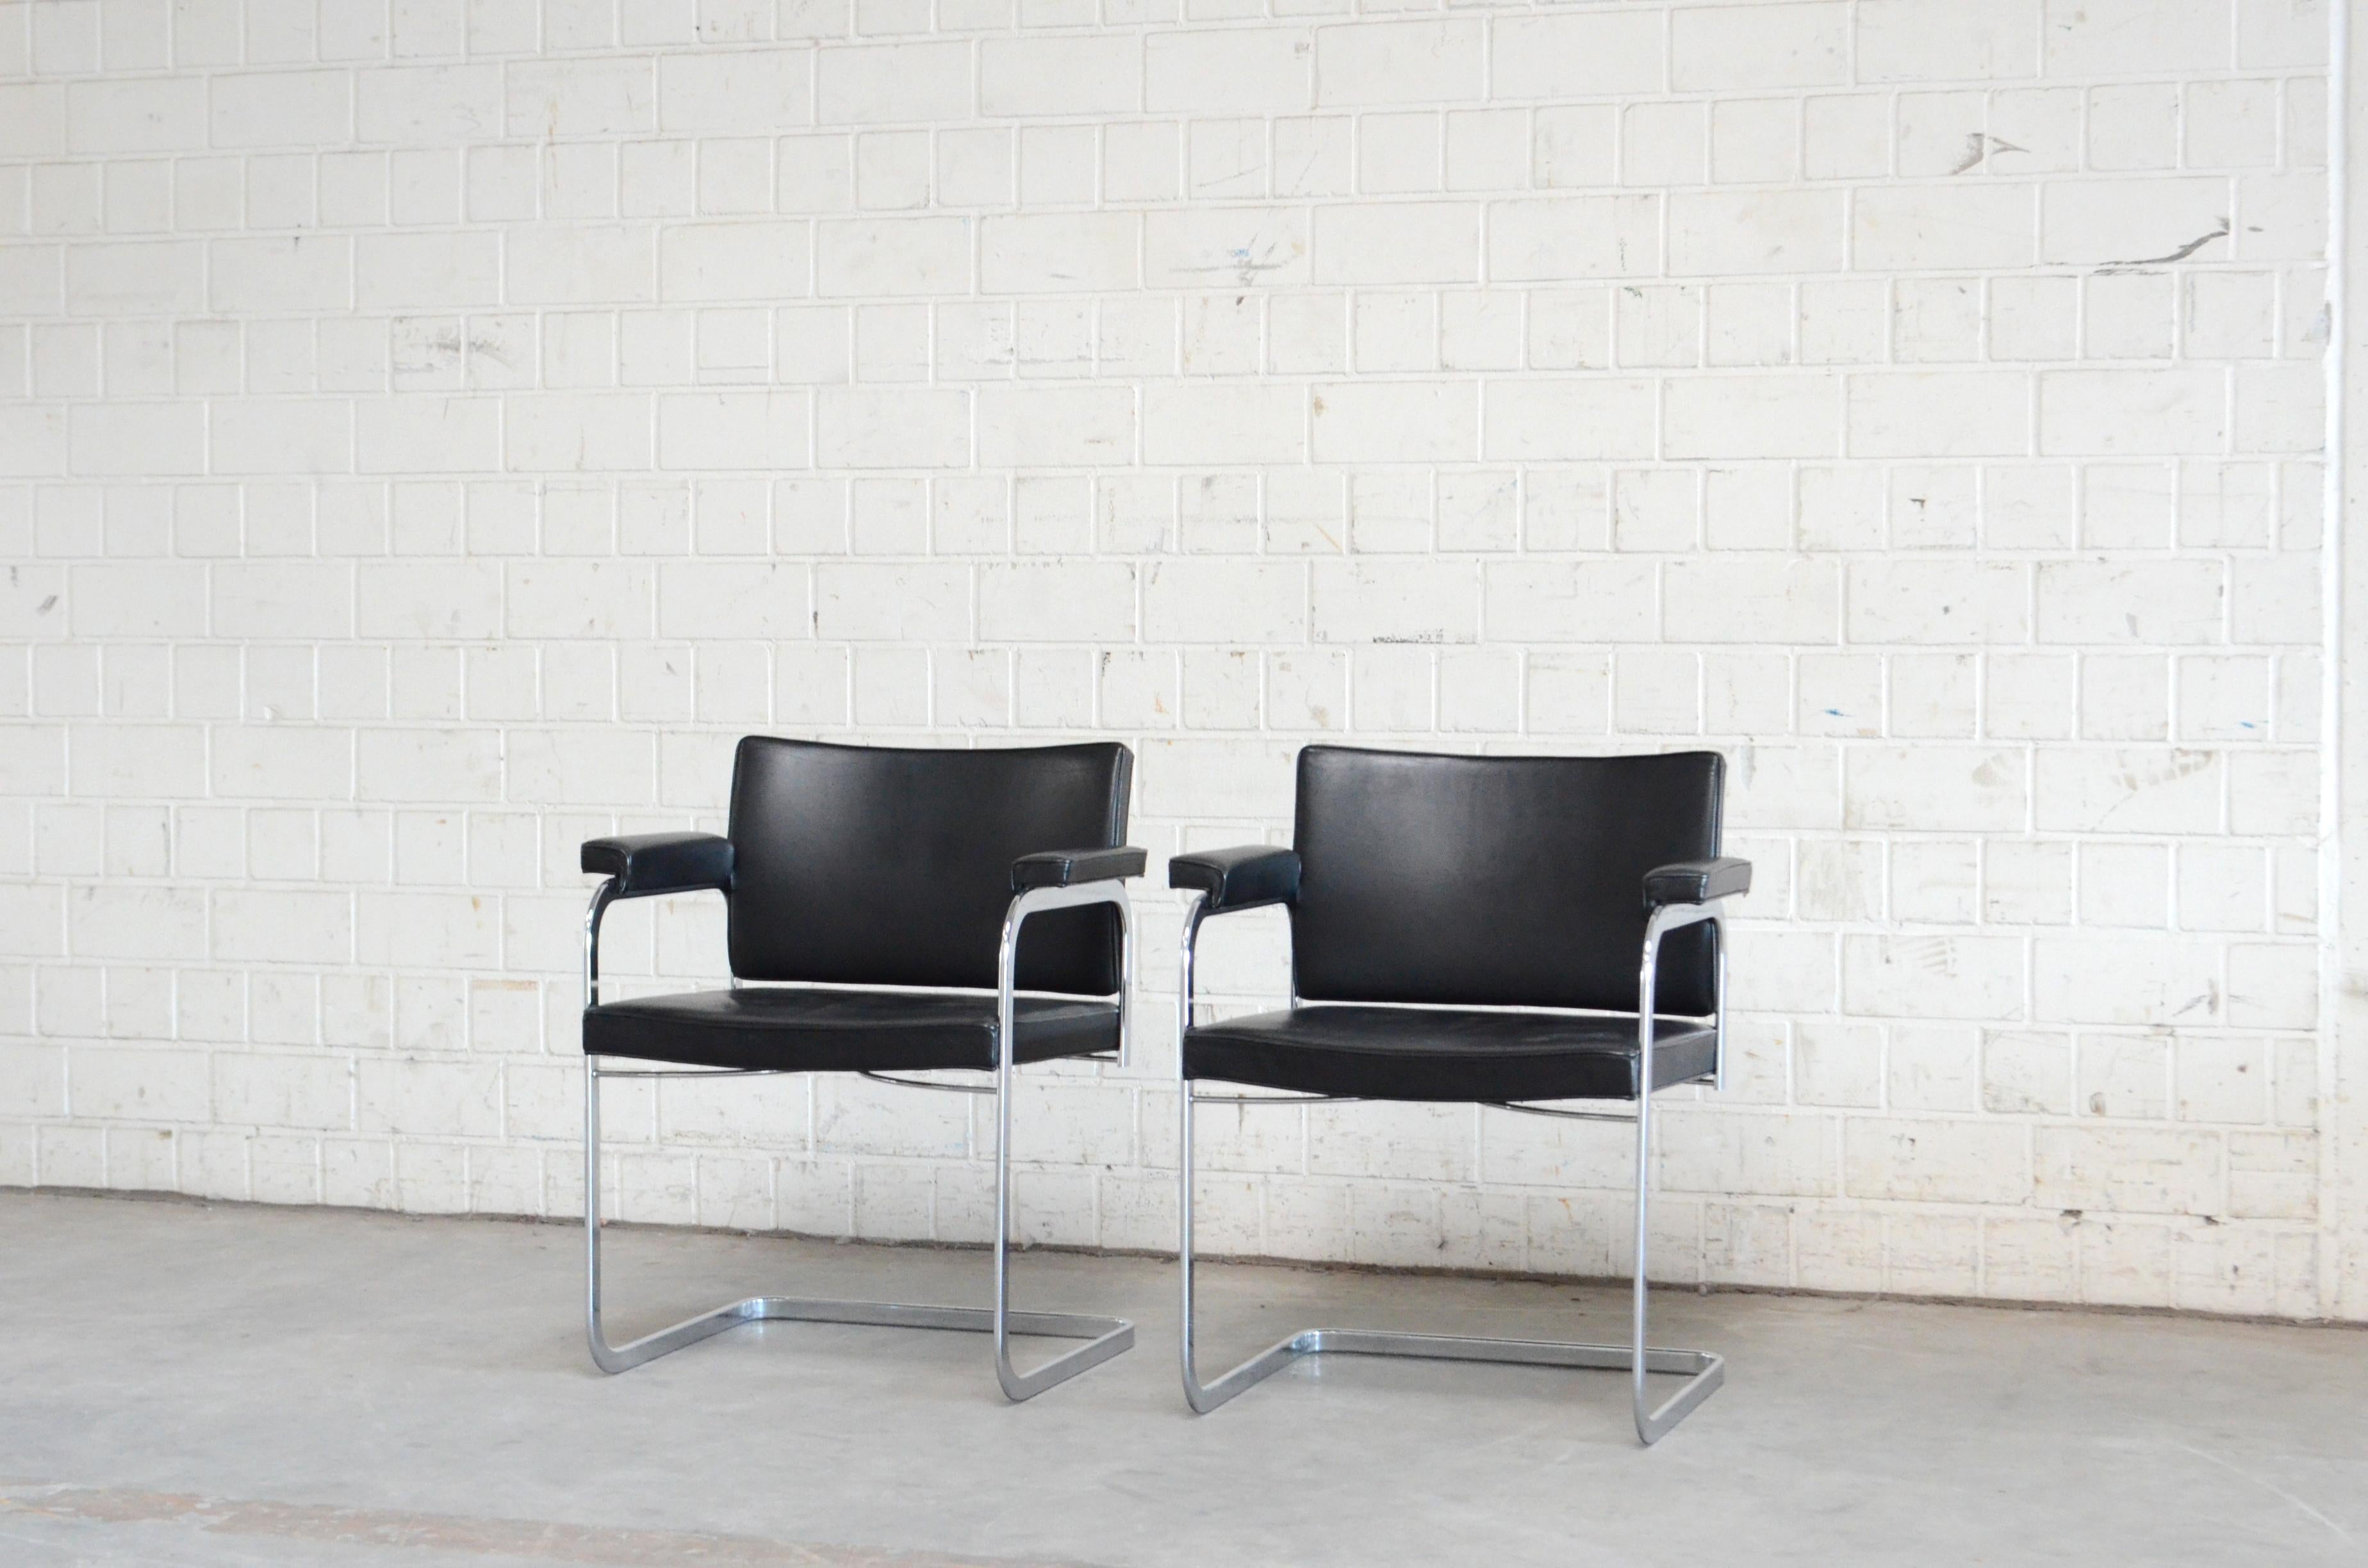 Robert Haussmann RH 305 armchair design of 1957 and manufactured by De Sede.
Black semianiline leather and a chrome steel frame.
This is a classic Swiss design chair.
Great condition.
Price for 1 chair
We have 2 chairs in store.